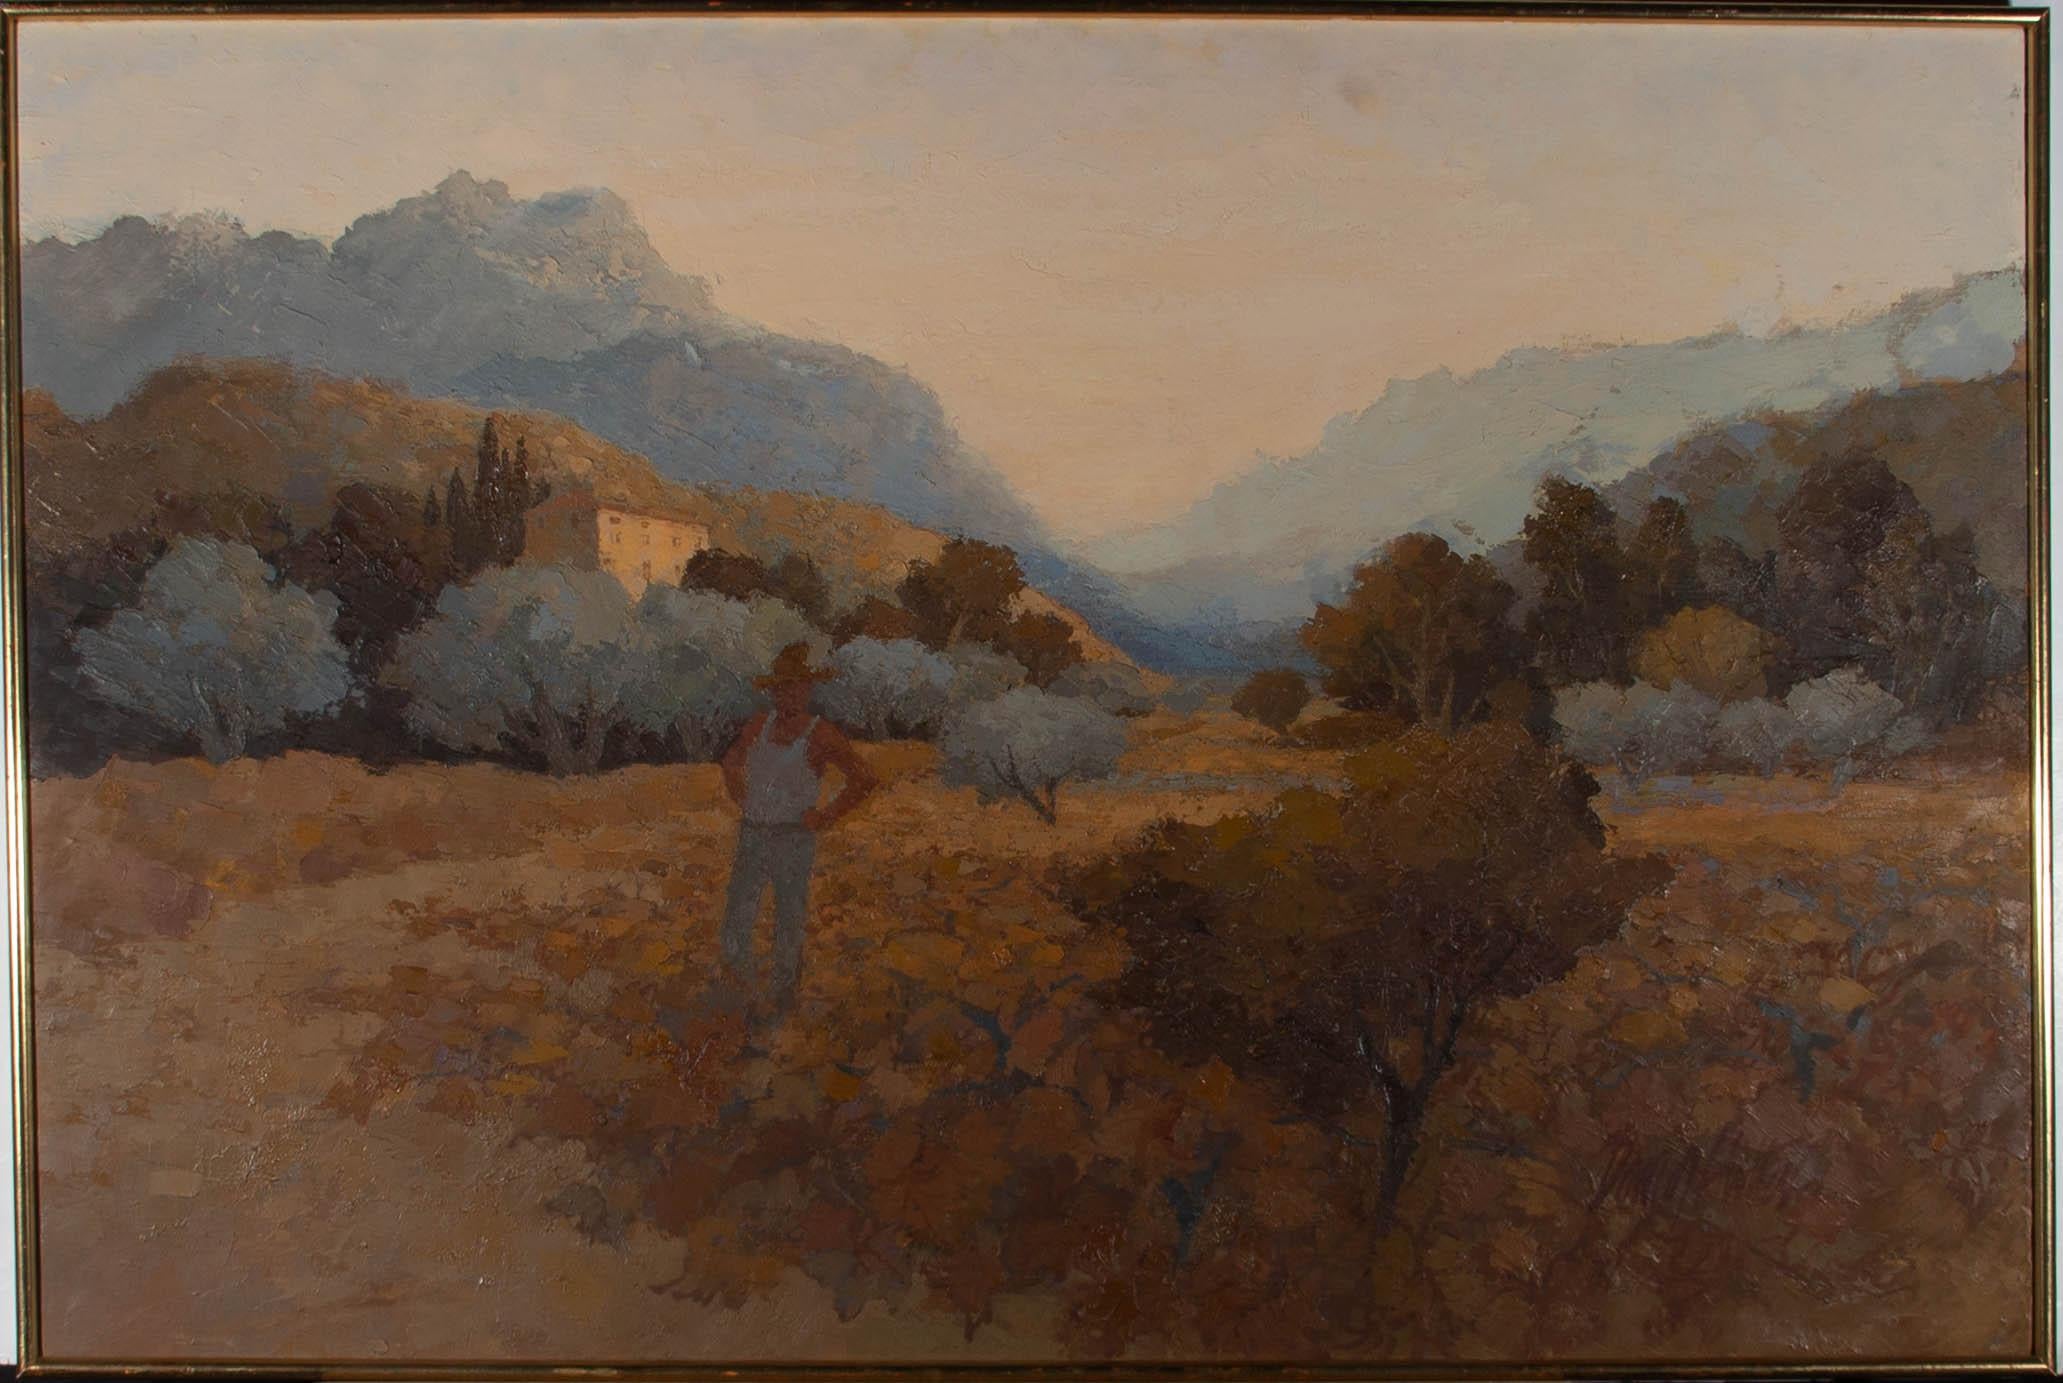 A serene and atmospheric landscape in impasto oil, showing a summery view of a shrubland valley near the Spanish town of Ayerbe. A male figure stands in the foreground, back lit by the waning glow of the setting sun. The artist has captured an